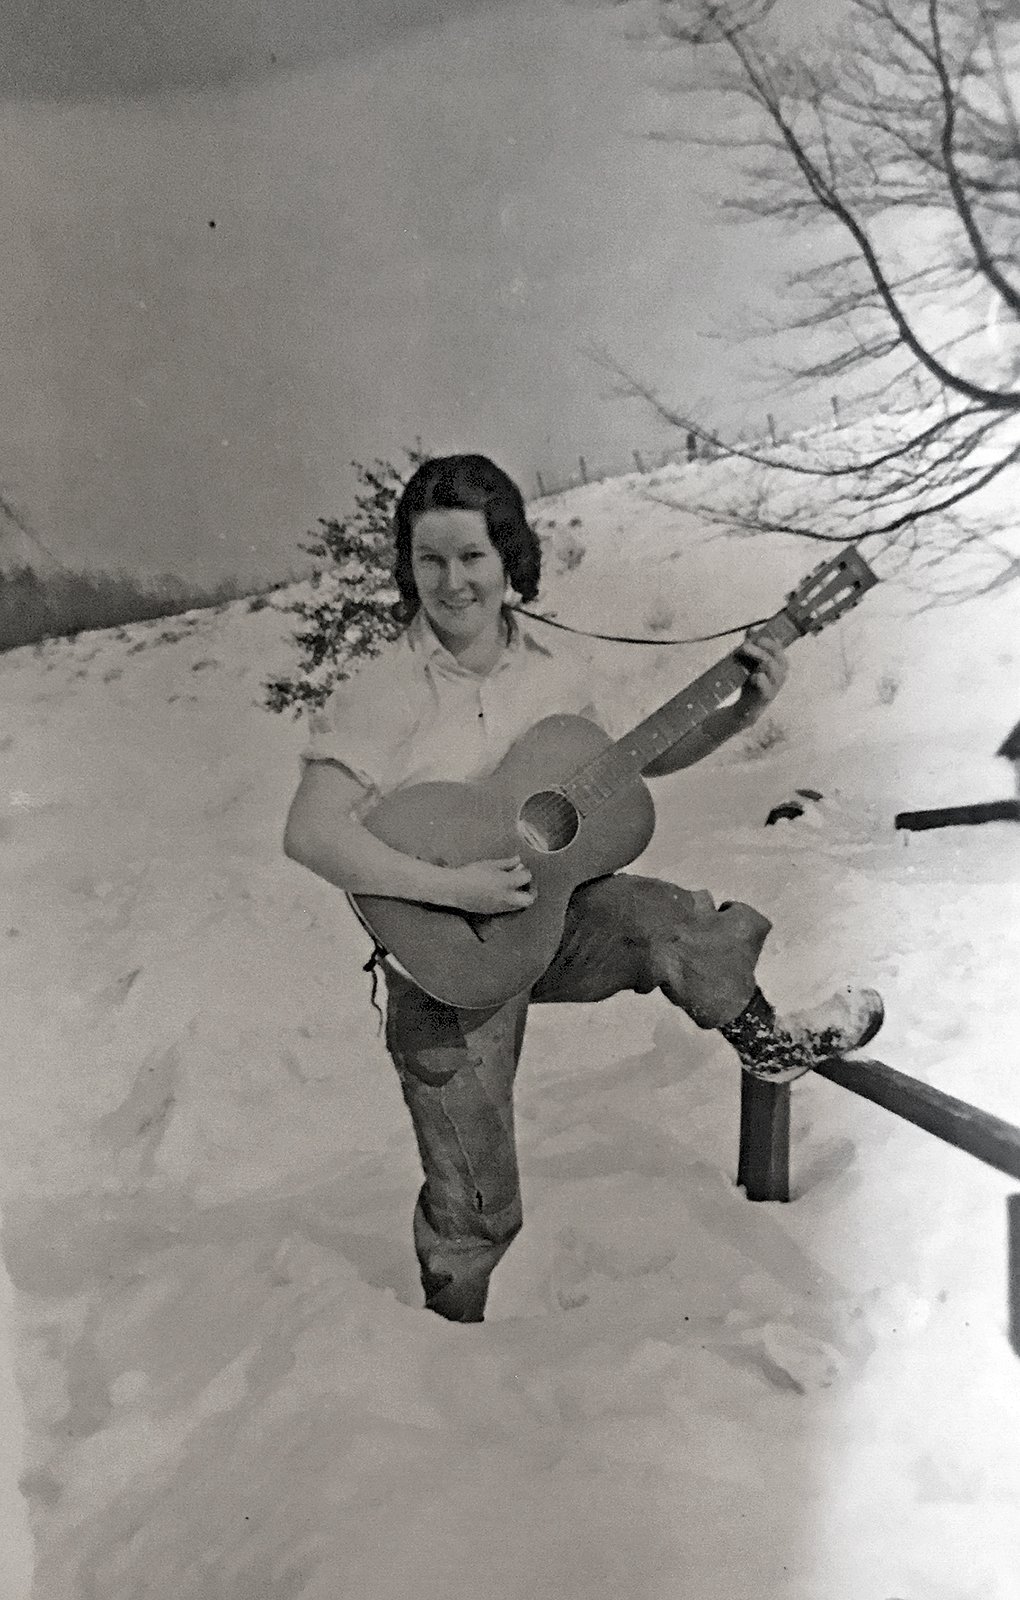 Maria Yohe playing guitar in the snow on the family farm, Pennsylvania, c. 1940s.